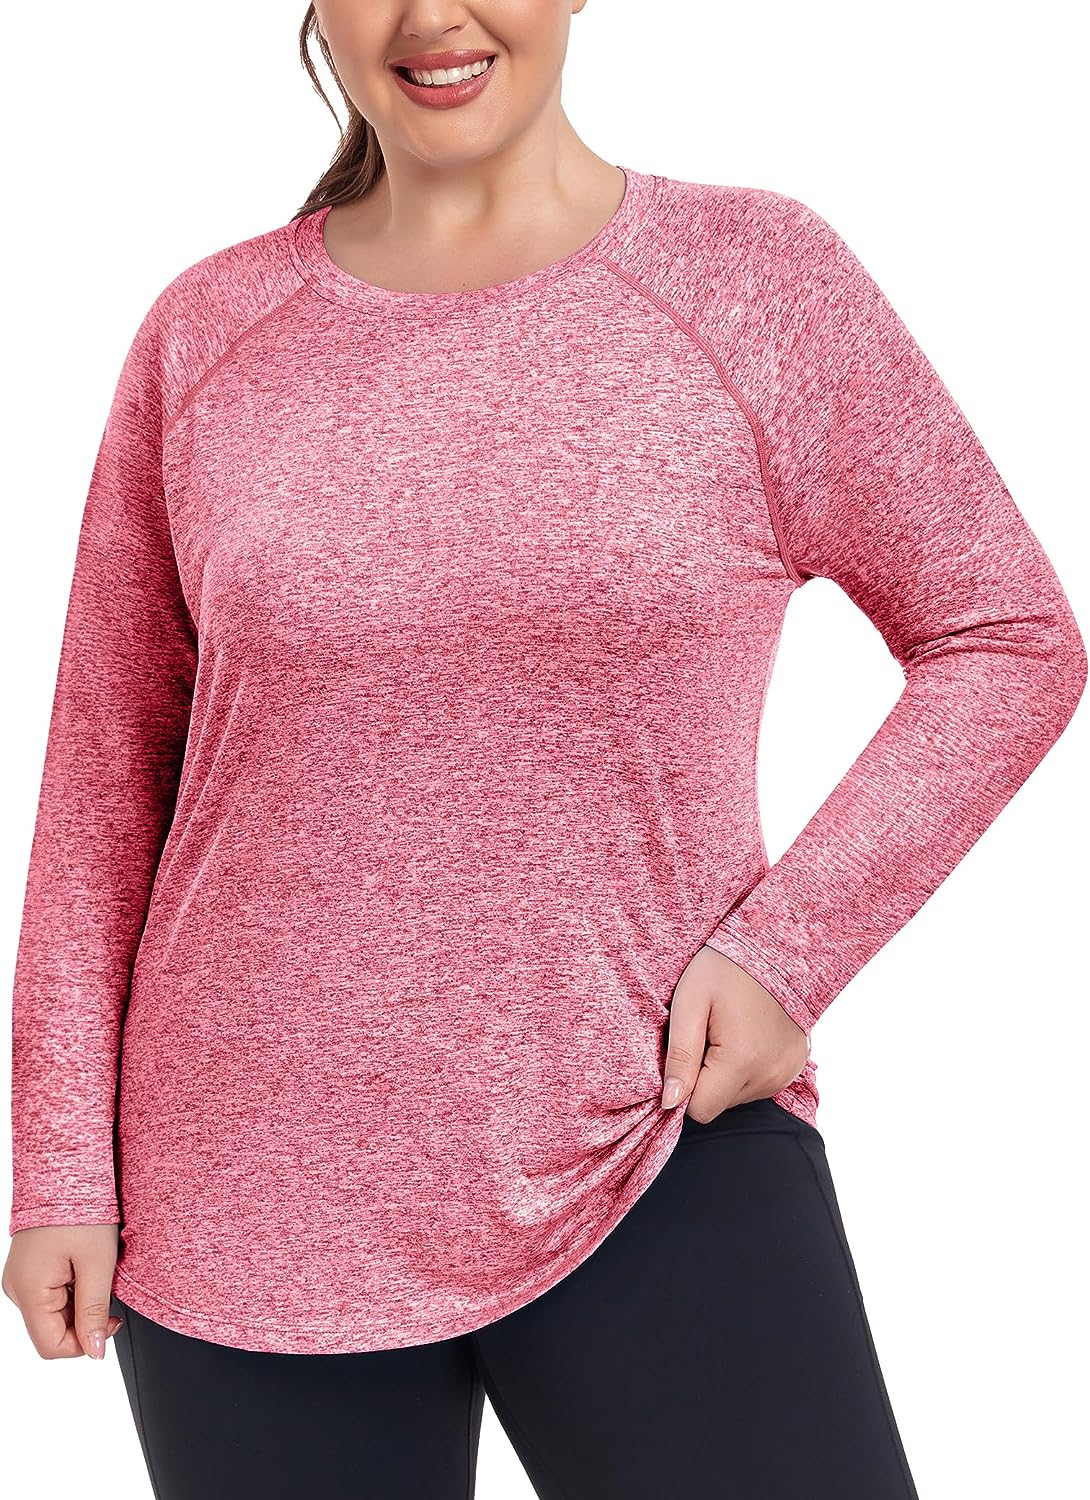  Women's Plus Size Workout Tops Sport Tee Loose Fit